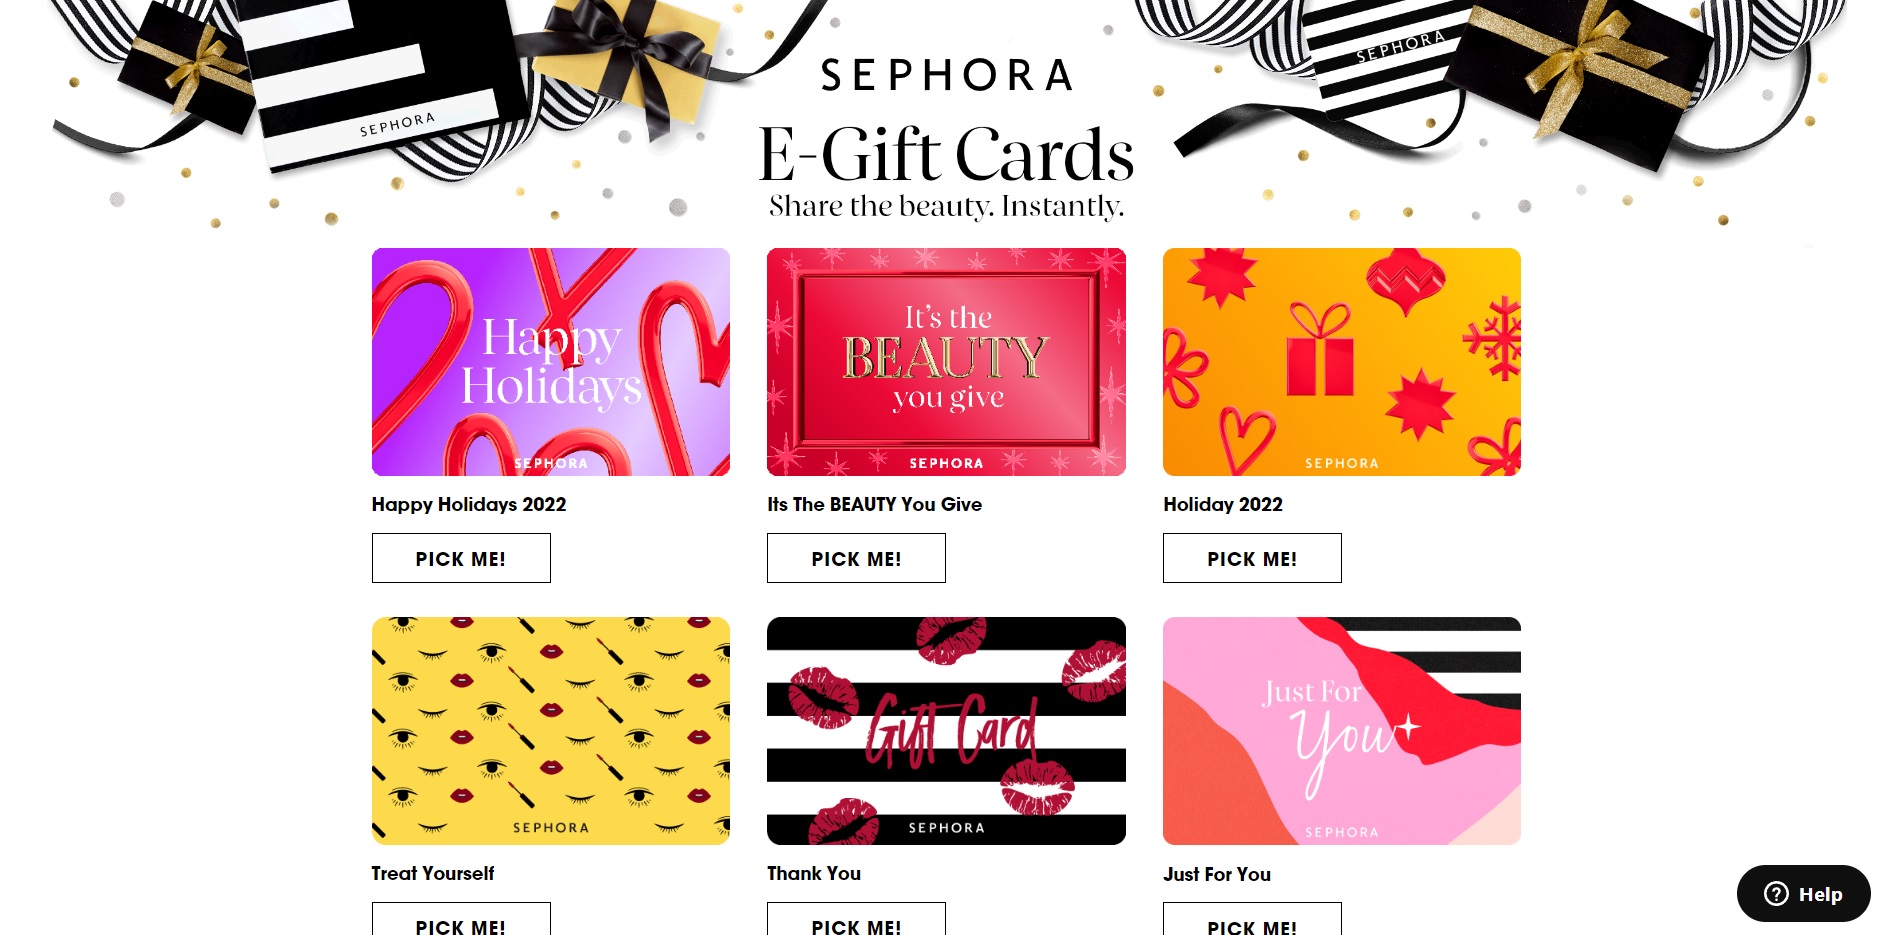 Top 10 Most Popular Gift Cards in Singapore